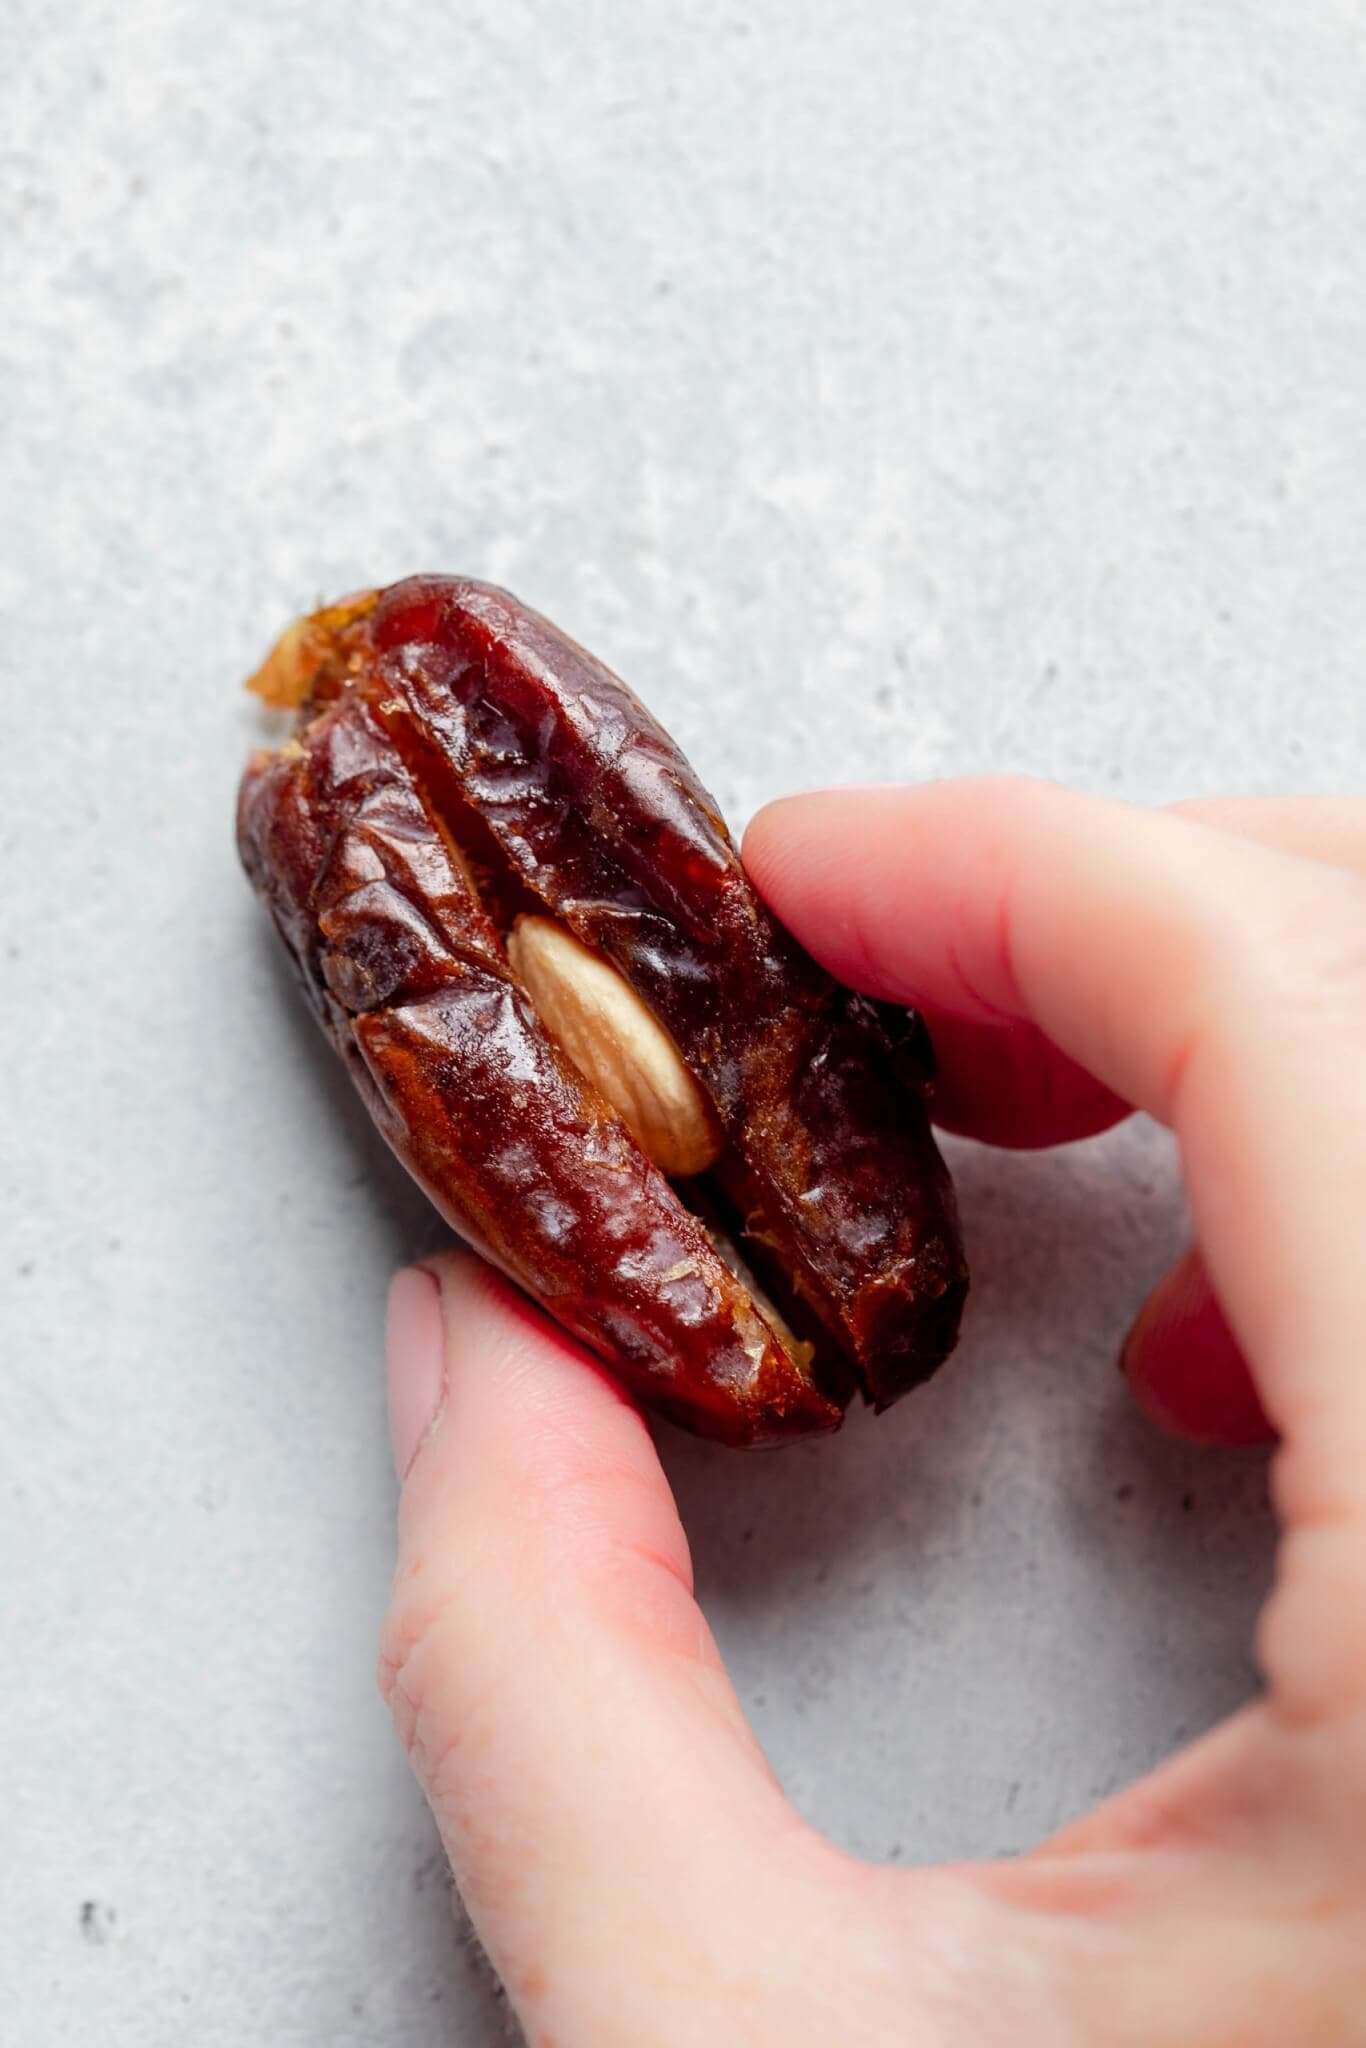 Date stuffed with almond